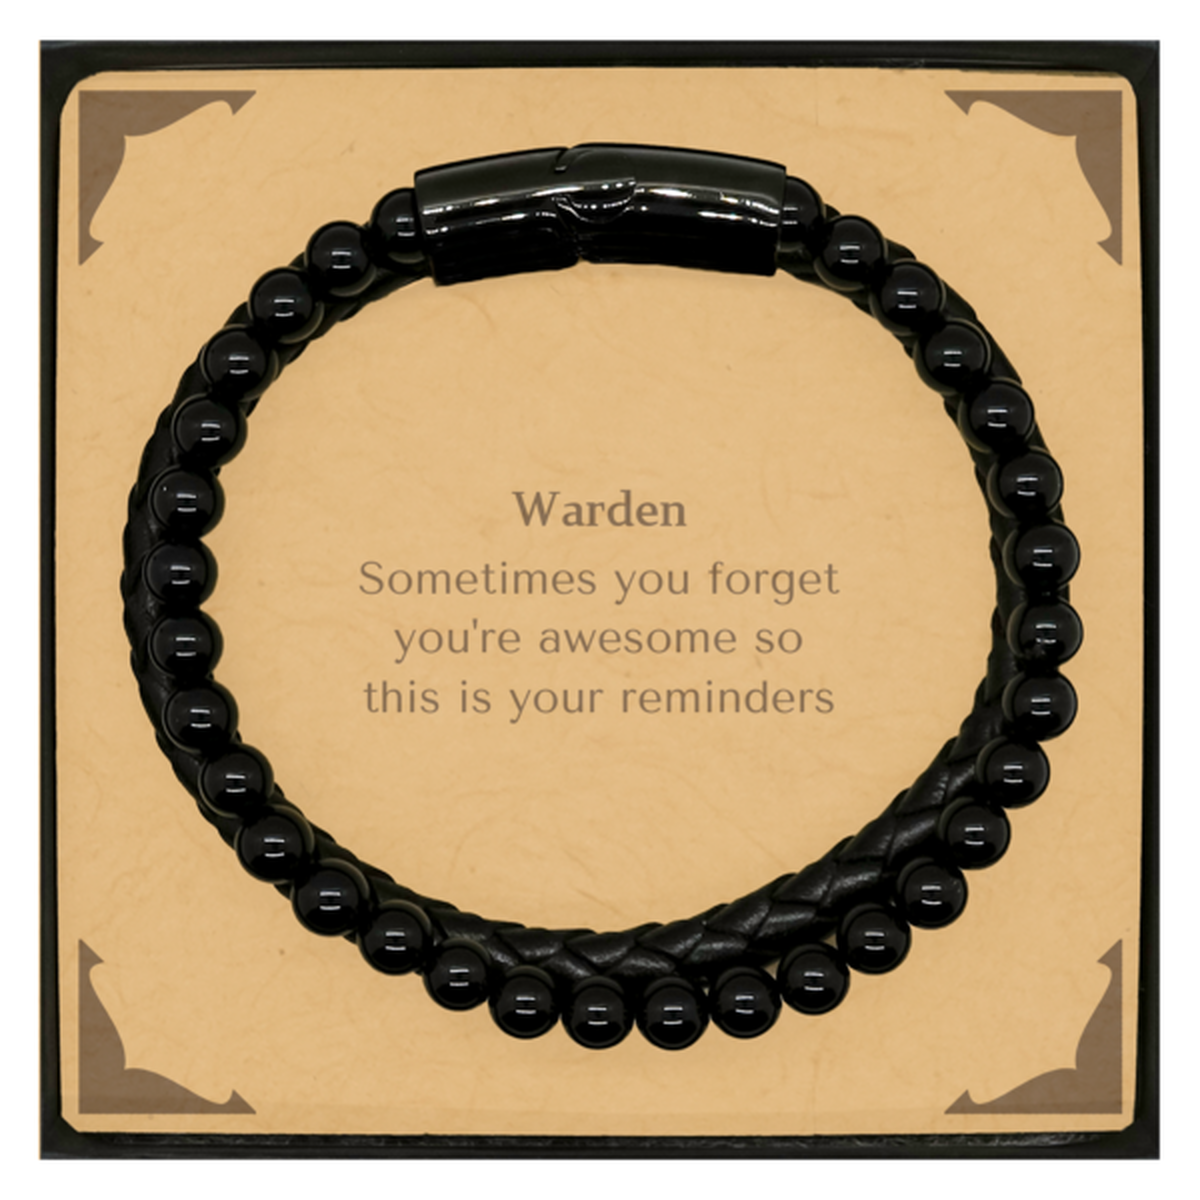 Sentimental Warden Stone Leather Bracelets, Warden Sometimes you forget you're awesome so this is your reminders, Graduation Christmas Birthday Gifts for Warden, Men, Women, Coworkers